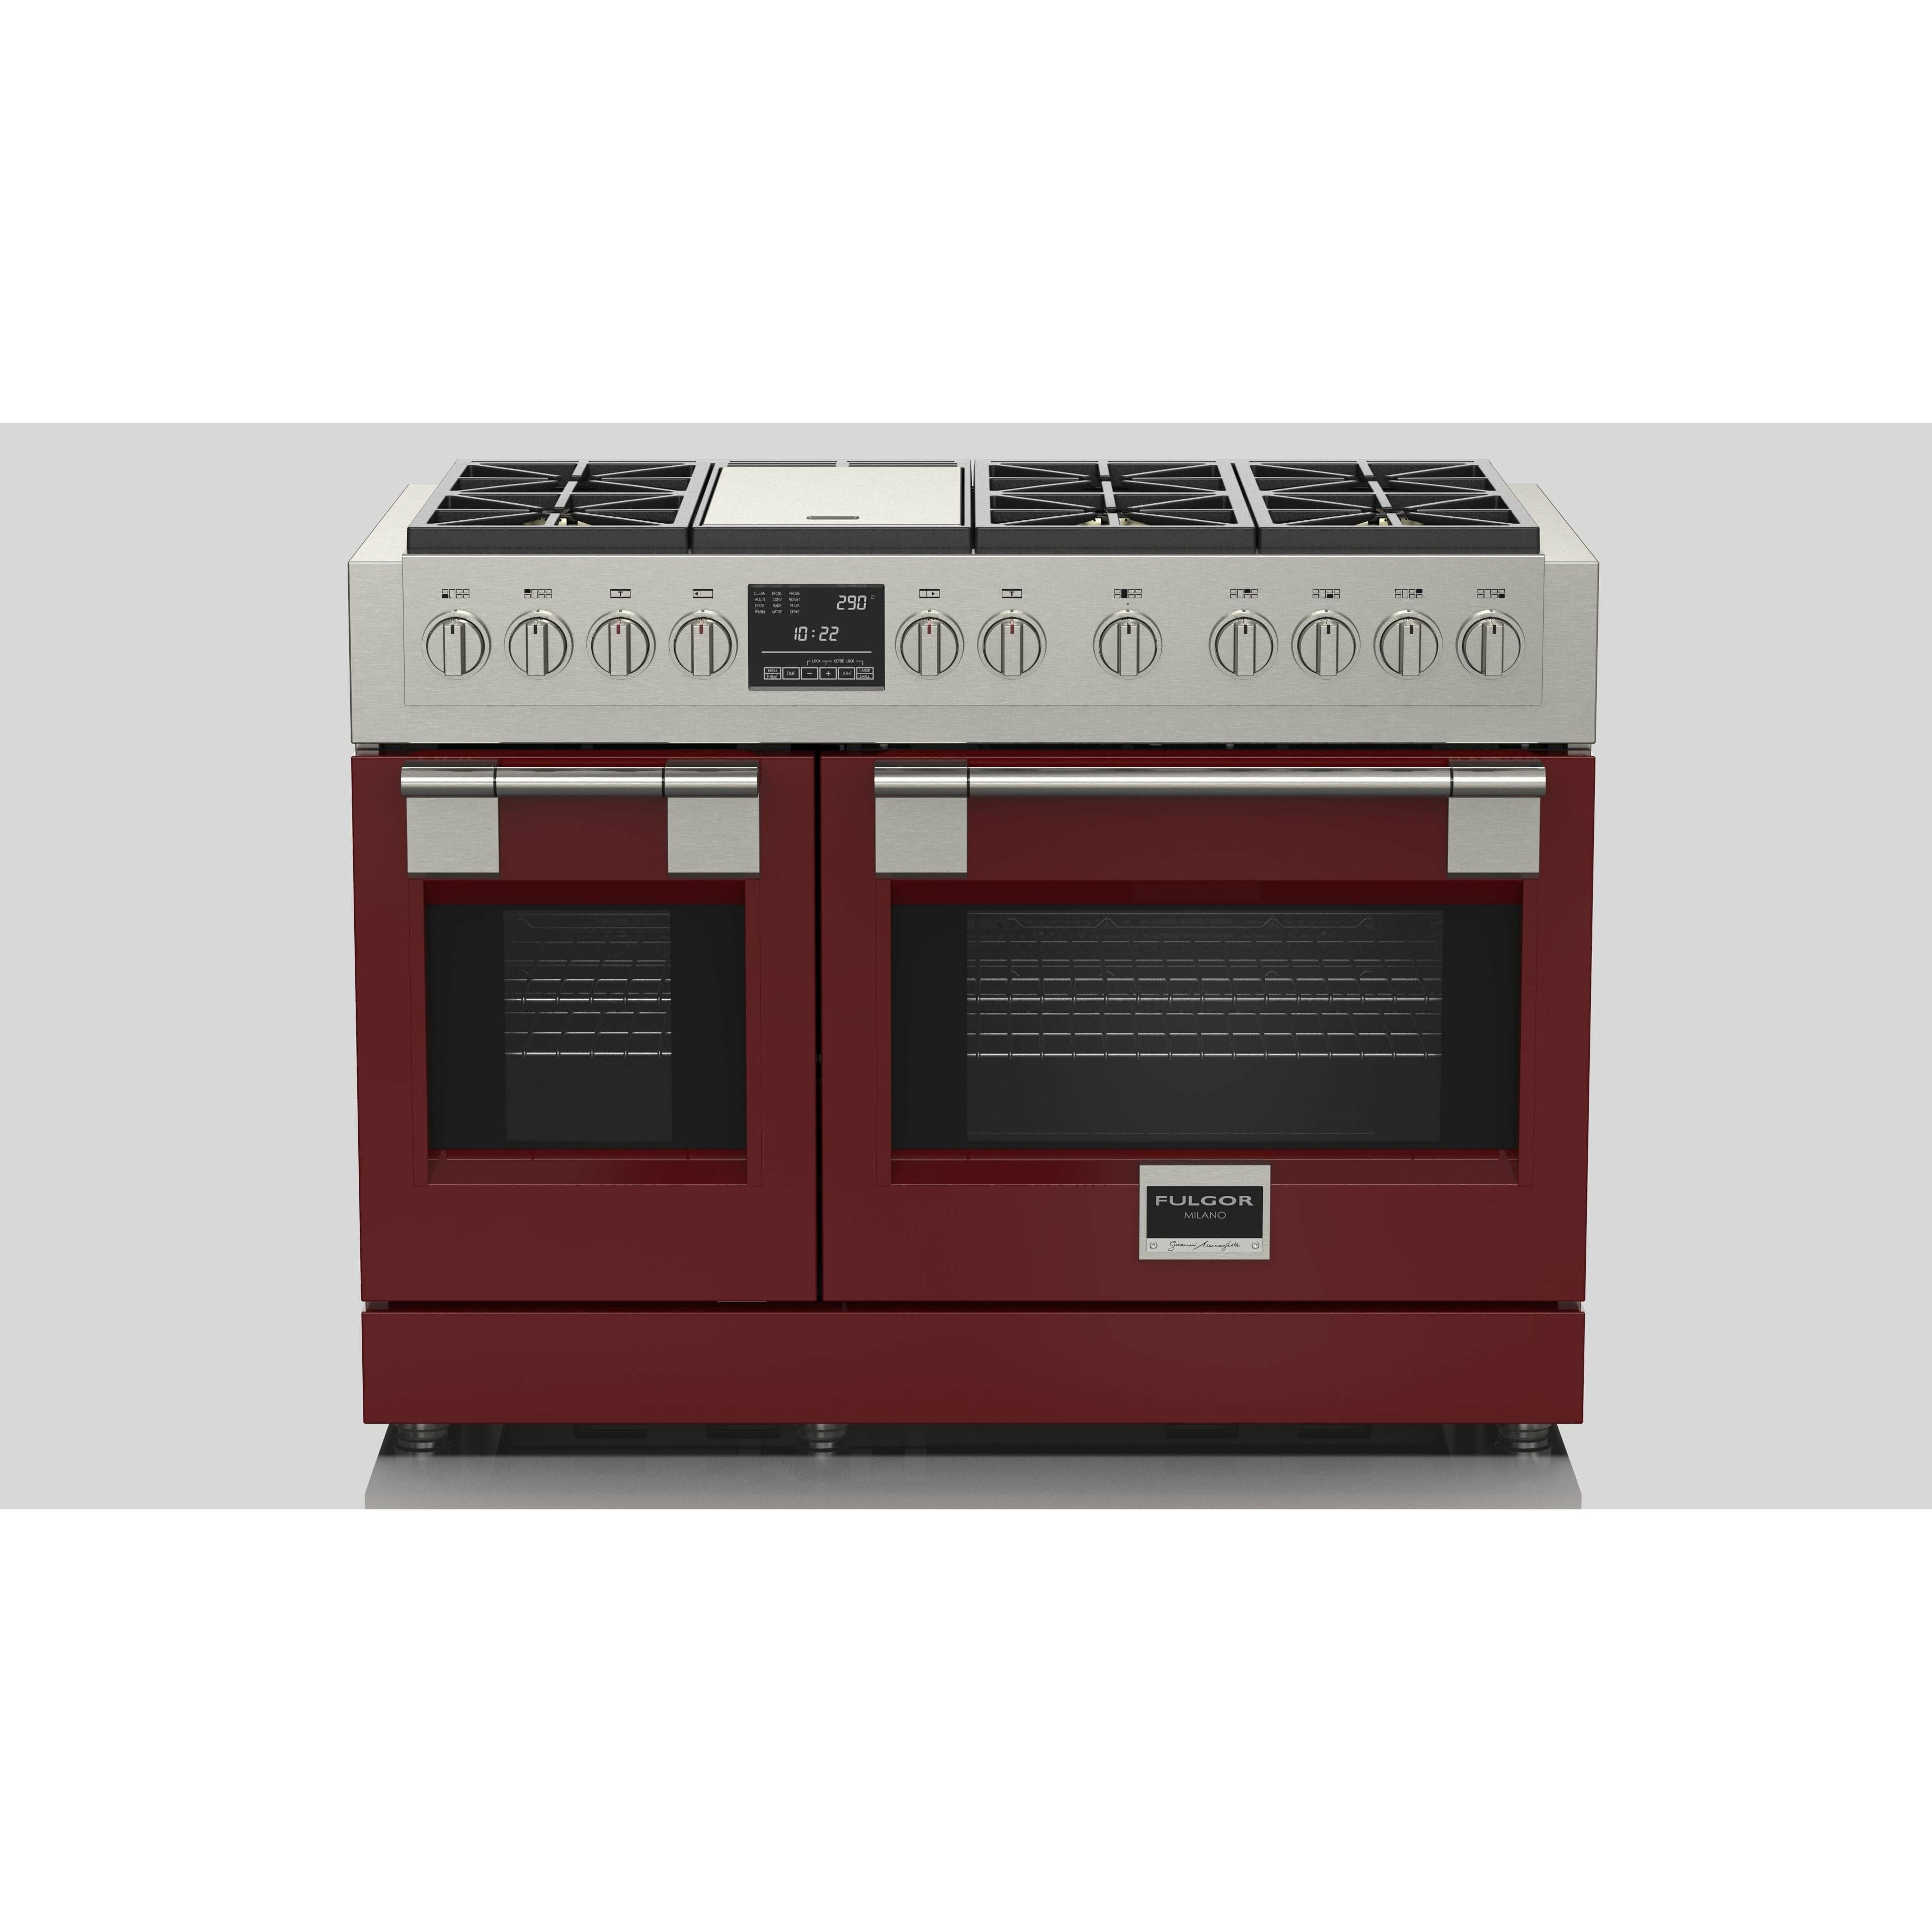 Fulgor Milano 48" Dual Fuel Professional Range with 6 Dual Flame Burners,  6.5 Cu. Ft. Total Capacity Stainless Steel - F6PDF486GS1 Ranges PDRKIT48RD Luxury Appliances Direct